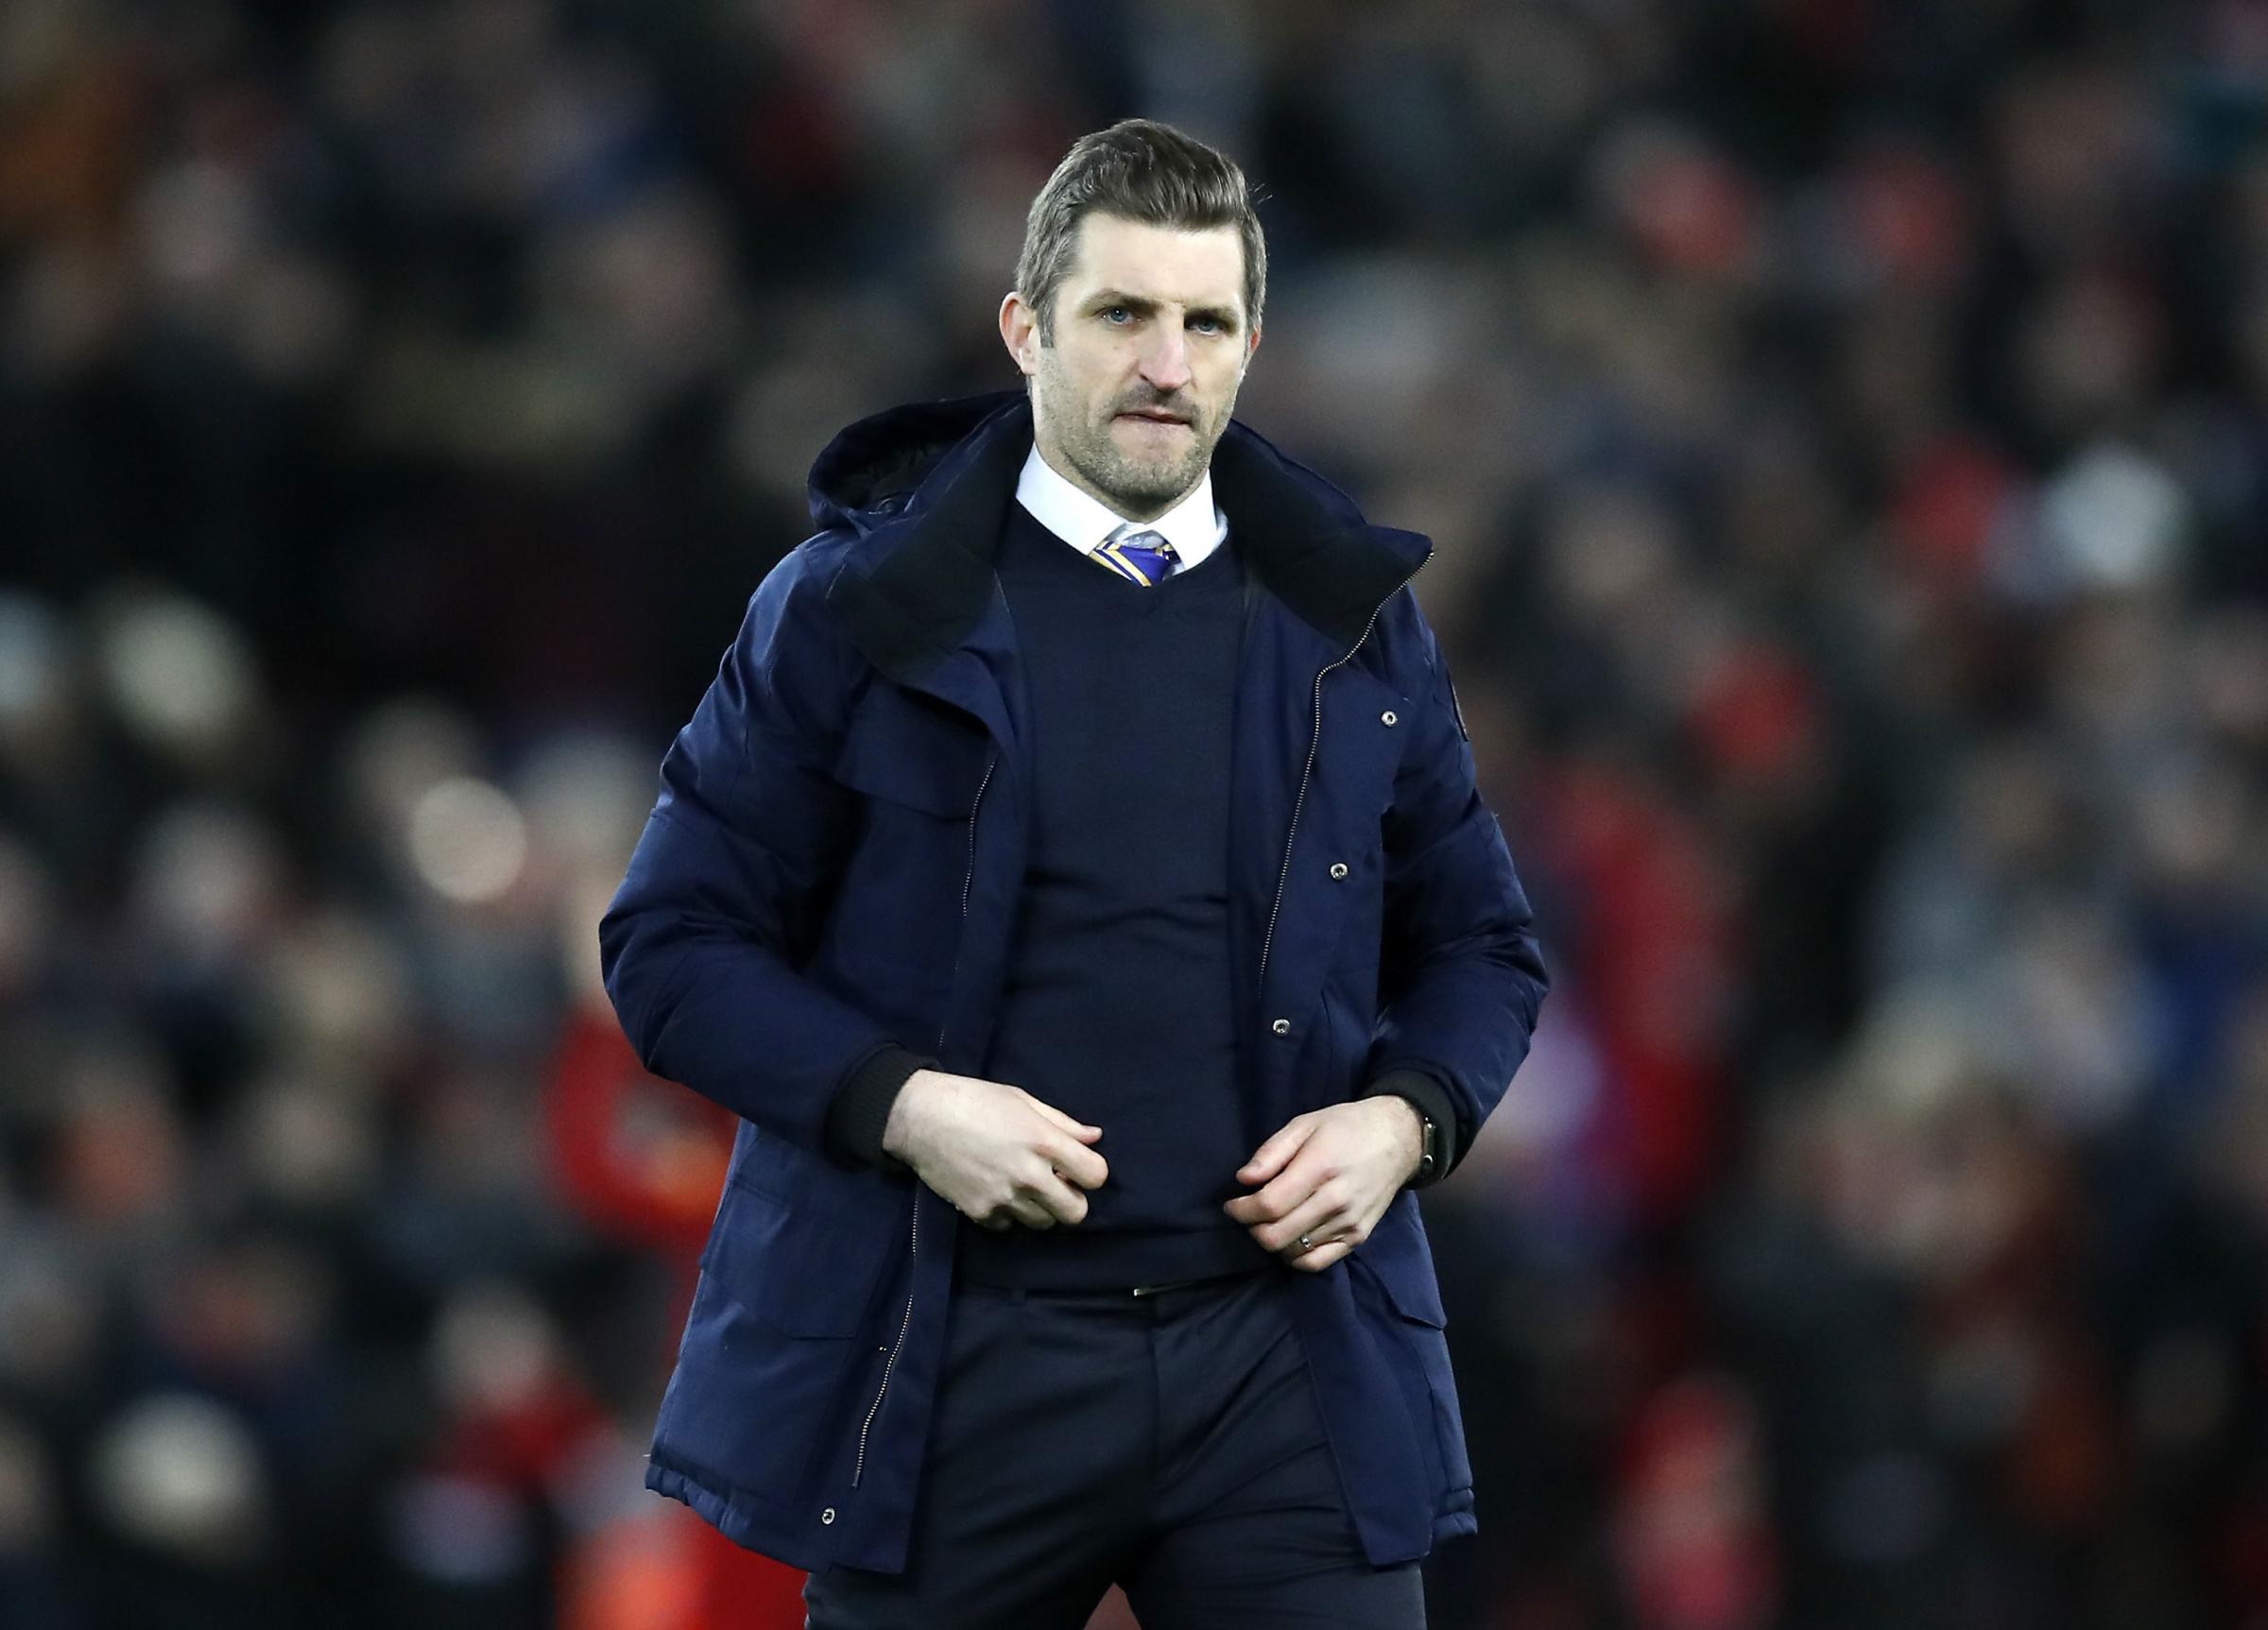 Shrewsbury Town manager Sam Ricketts after the FA Cup fourth round replay match at Anfield, Liverpool. PA Photo. Picture date: Tuesday February 4, 2020. See PA story SOCCER Liverpool. Photo credit should read: Martin Rickett/PA Wire. RESTRICTIONS: